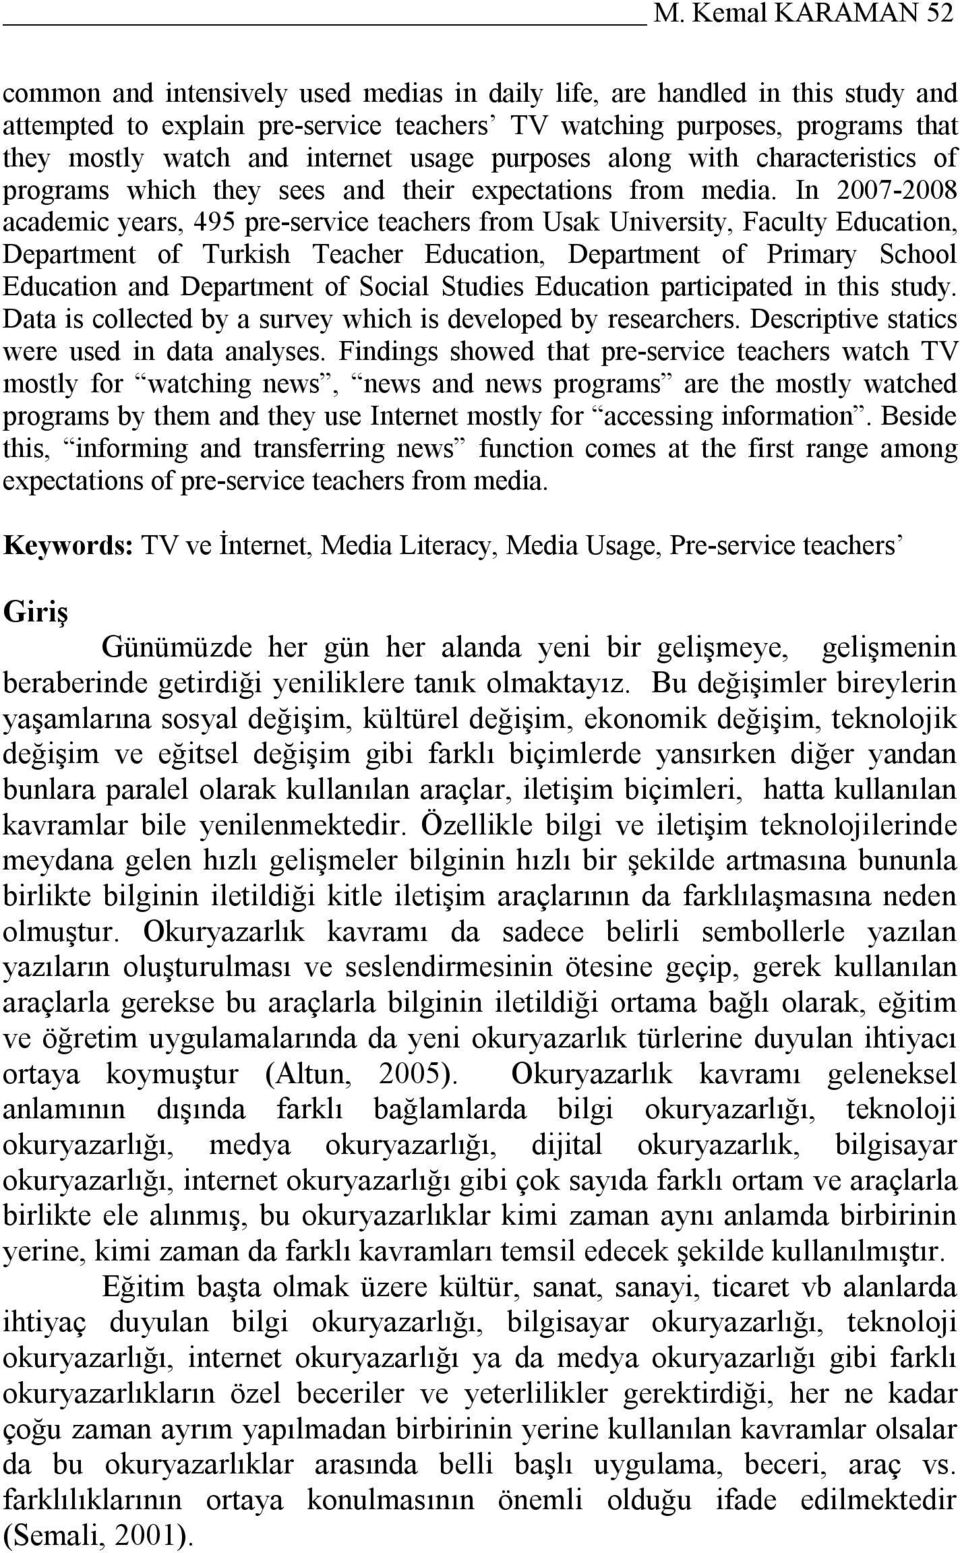 In 2007-2008 academic years, 495 pre-service teachers from Usak University, Faculty Education, Department of Turkish Teacher Education, Department of Primary School Education and Department of Social